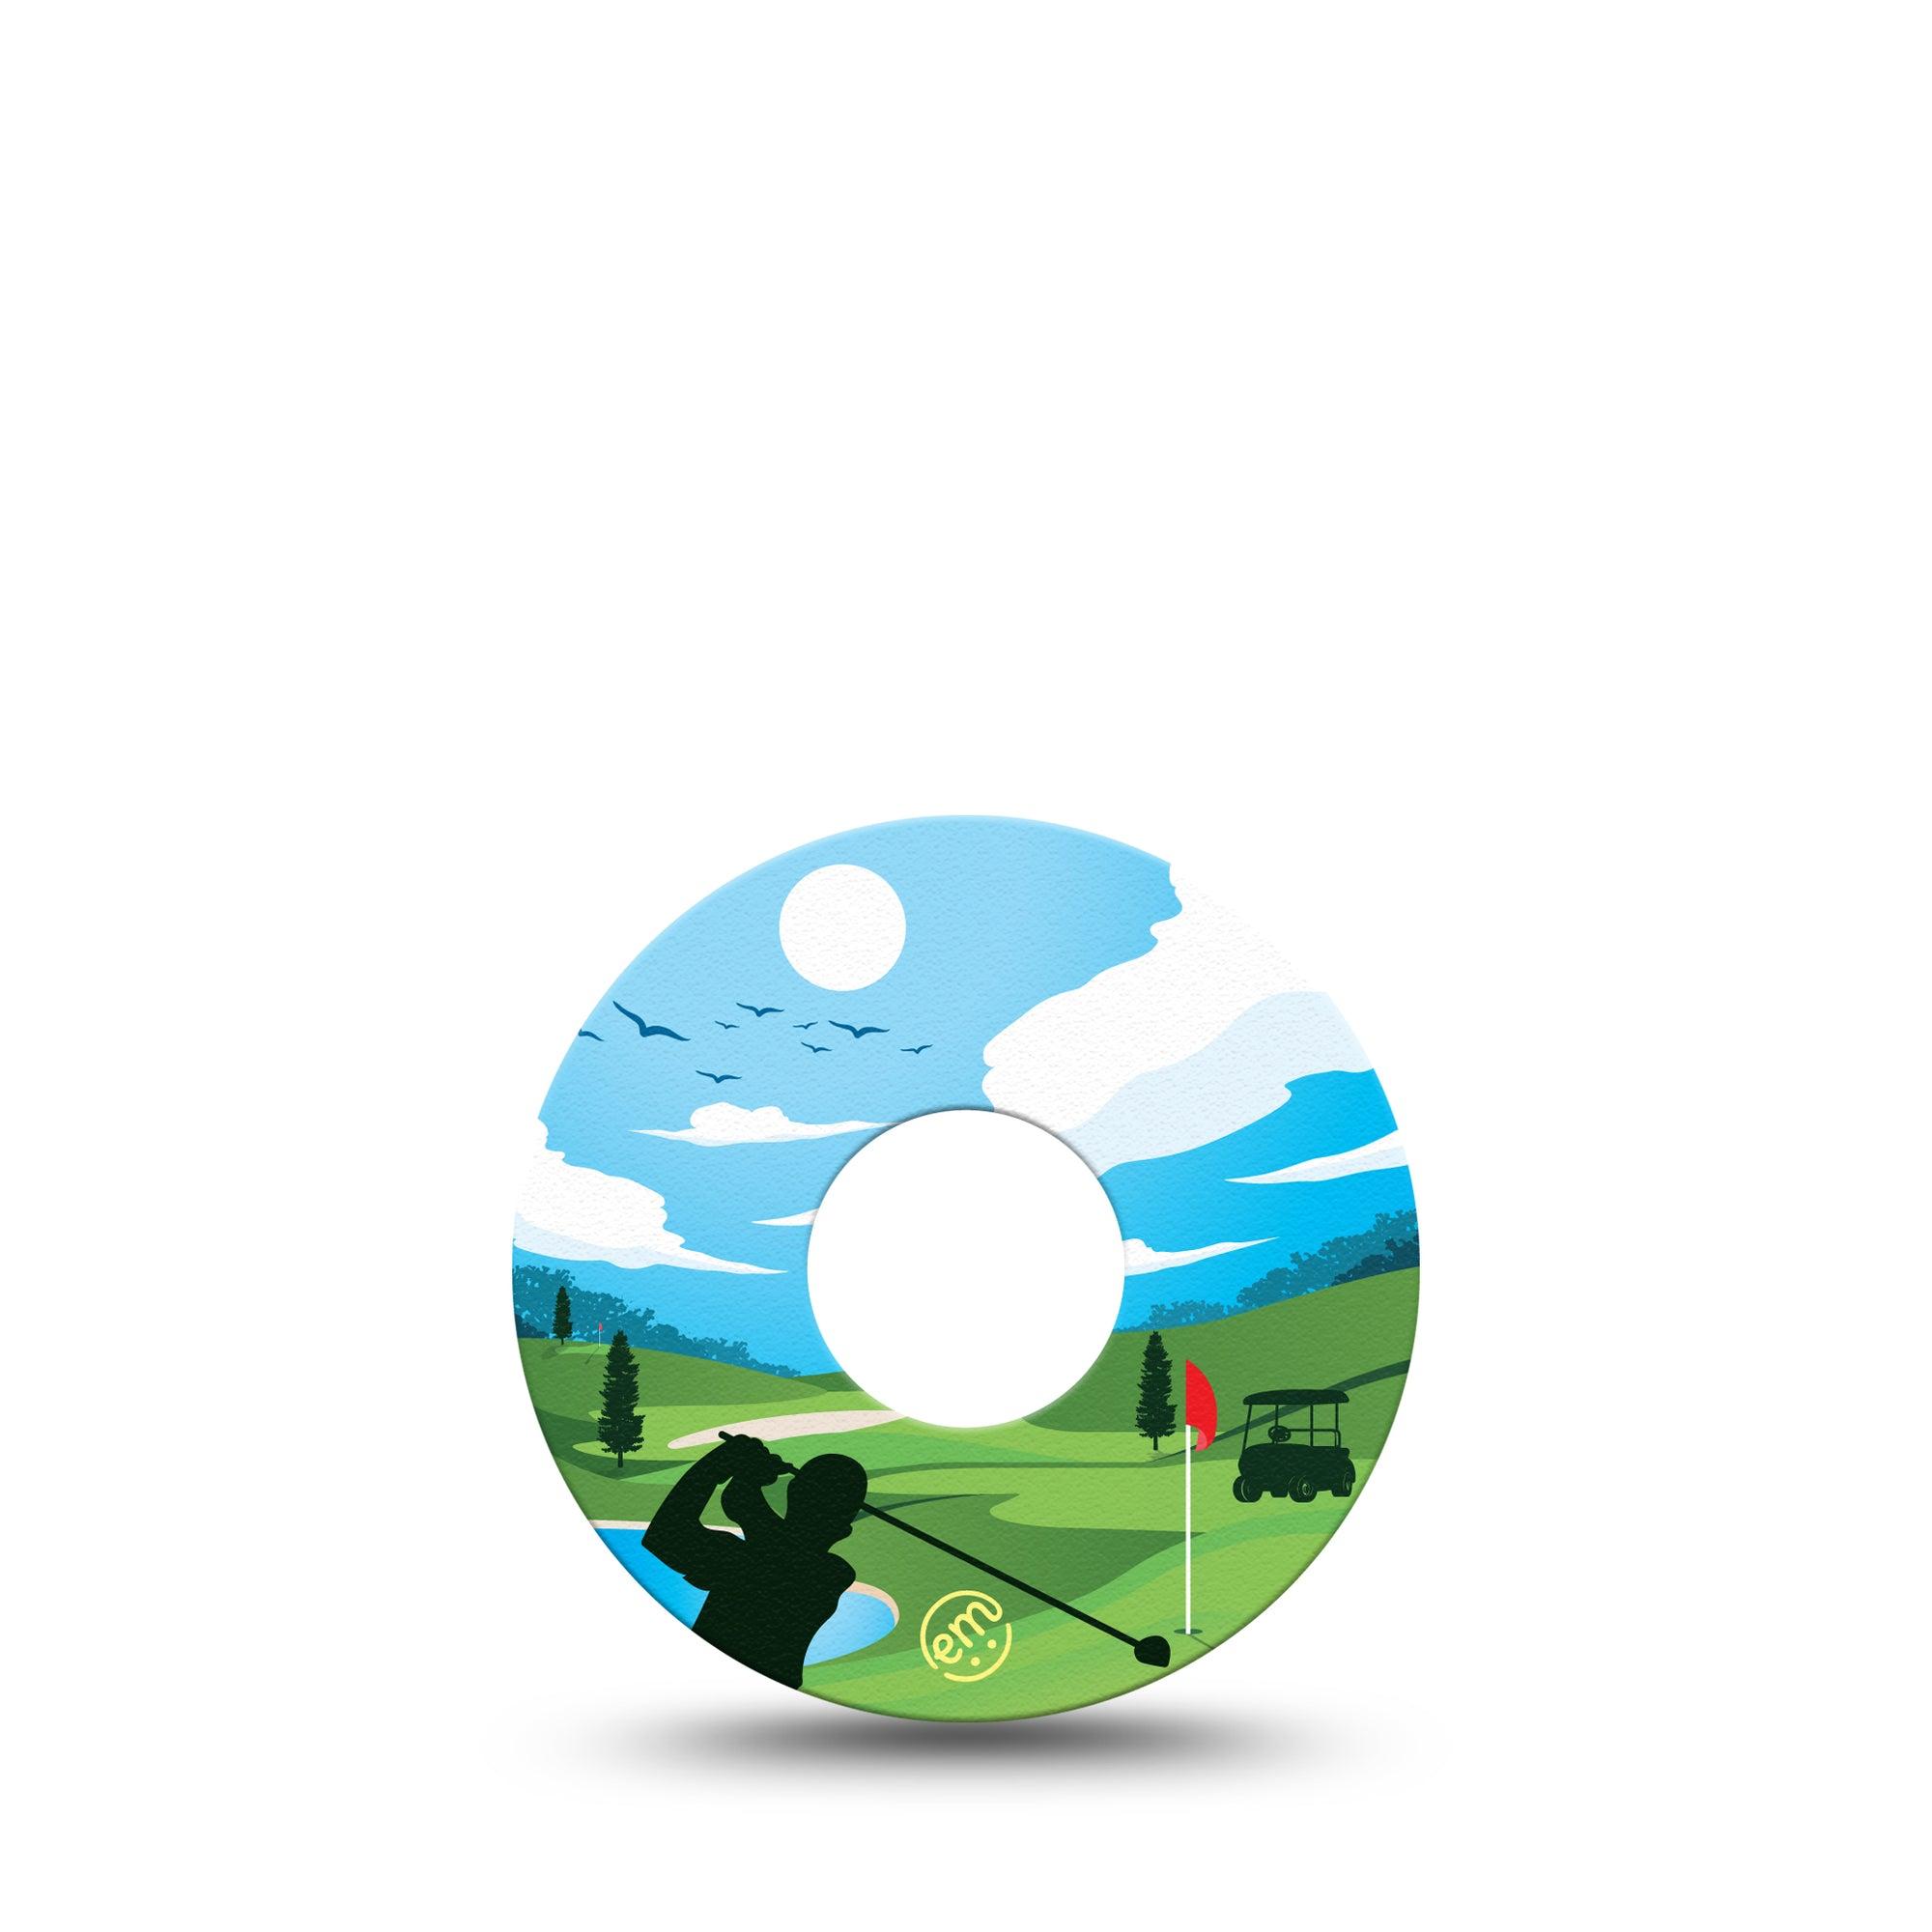 ExpressionMed Golf Libre 3 Tape, Single, Golf Stance Themed, CGM Plaster Patch Design